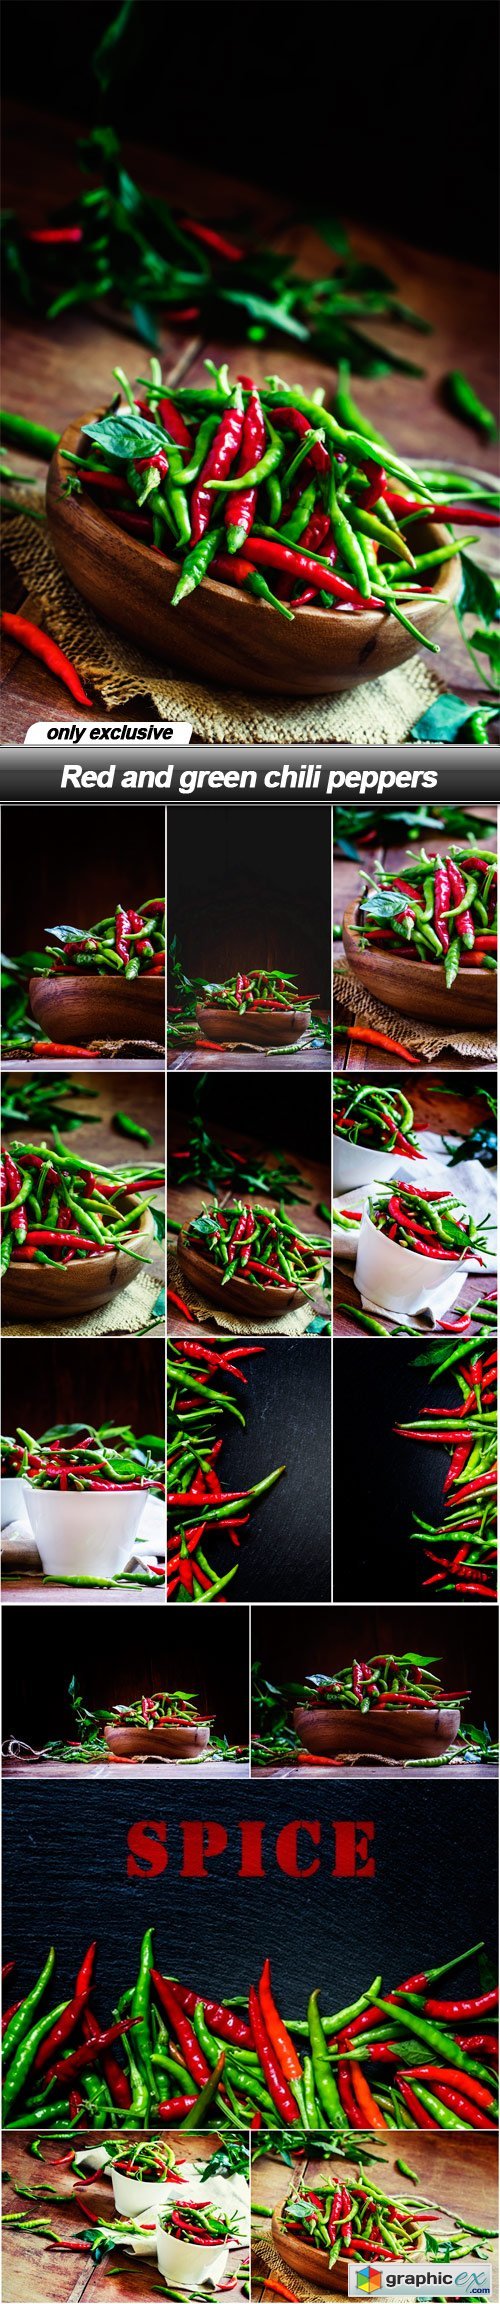 Red and green chili peppers - 16 UHQ JPEG